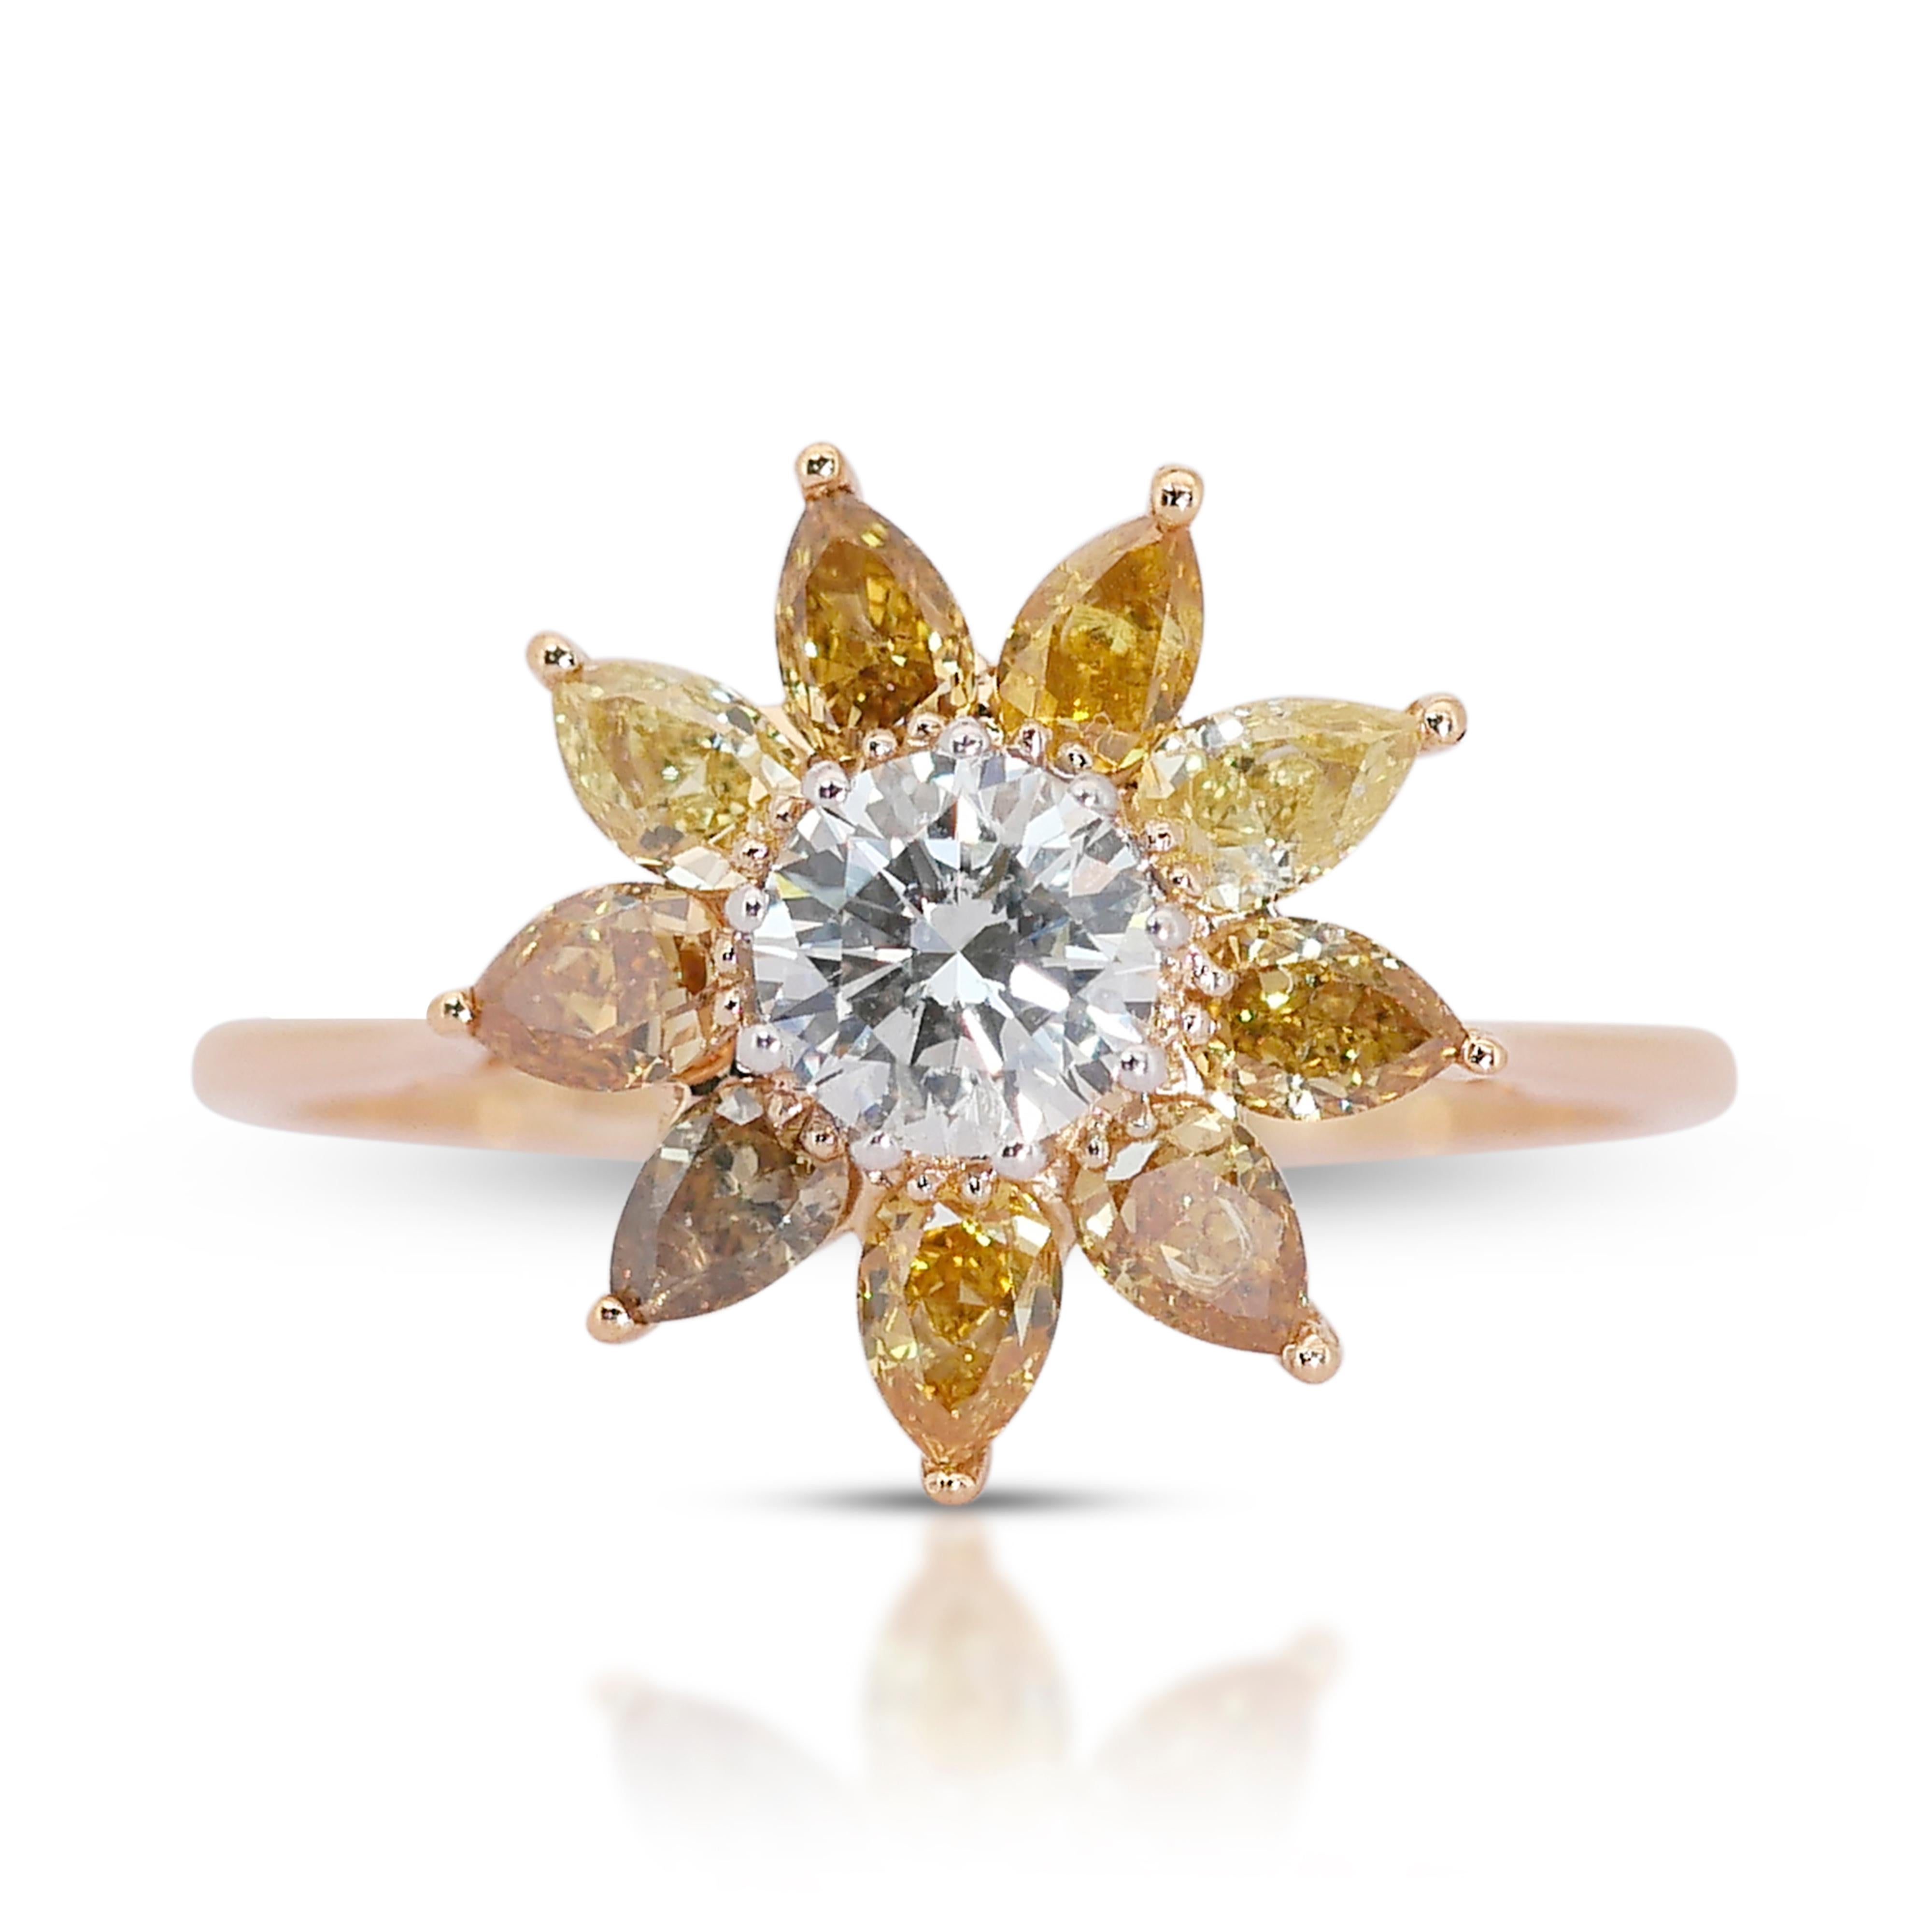 Vibrant  and one-of-a-kind 1.85 ct Fancy Colored Diamond Ring in 18k Yellow Gold - IGI Certified

Crafted in 18k yellow gold, this fancy-colored diamond ring showcases a magnificent 0.50-carat round diamond at its center. Surrounding this central